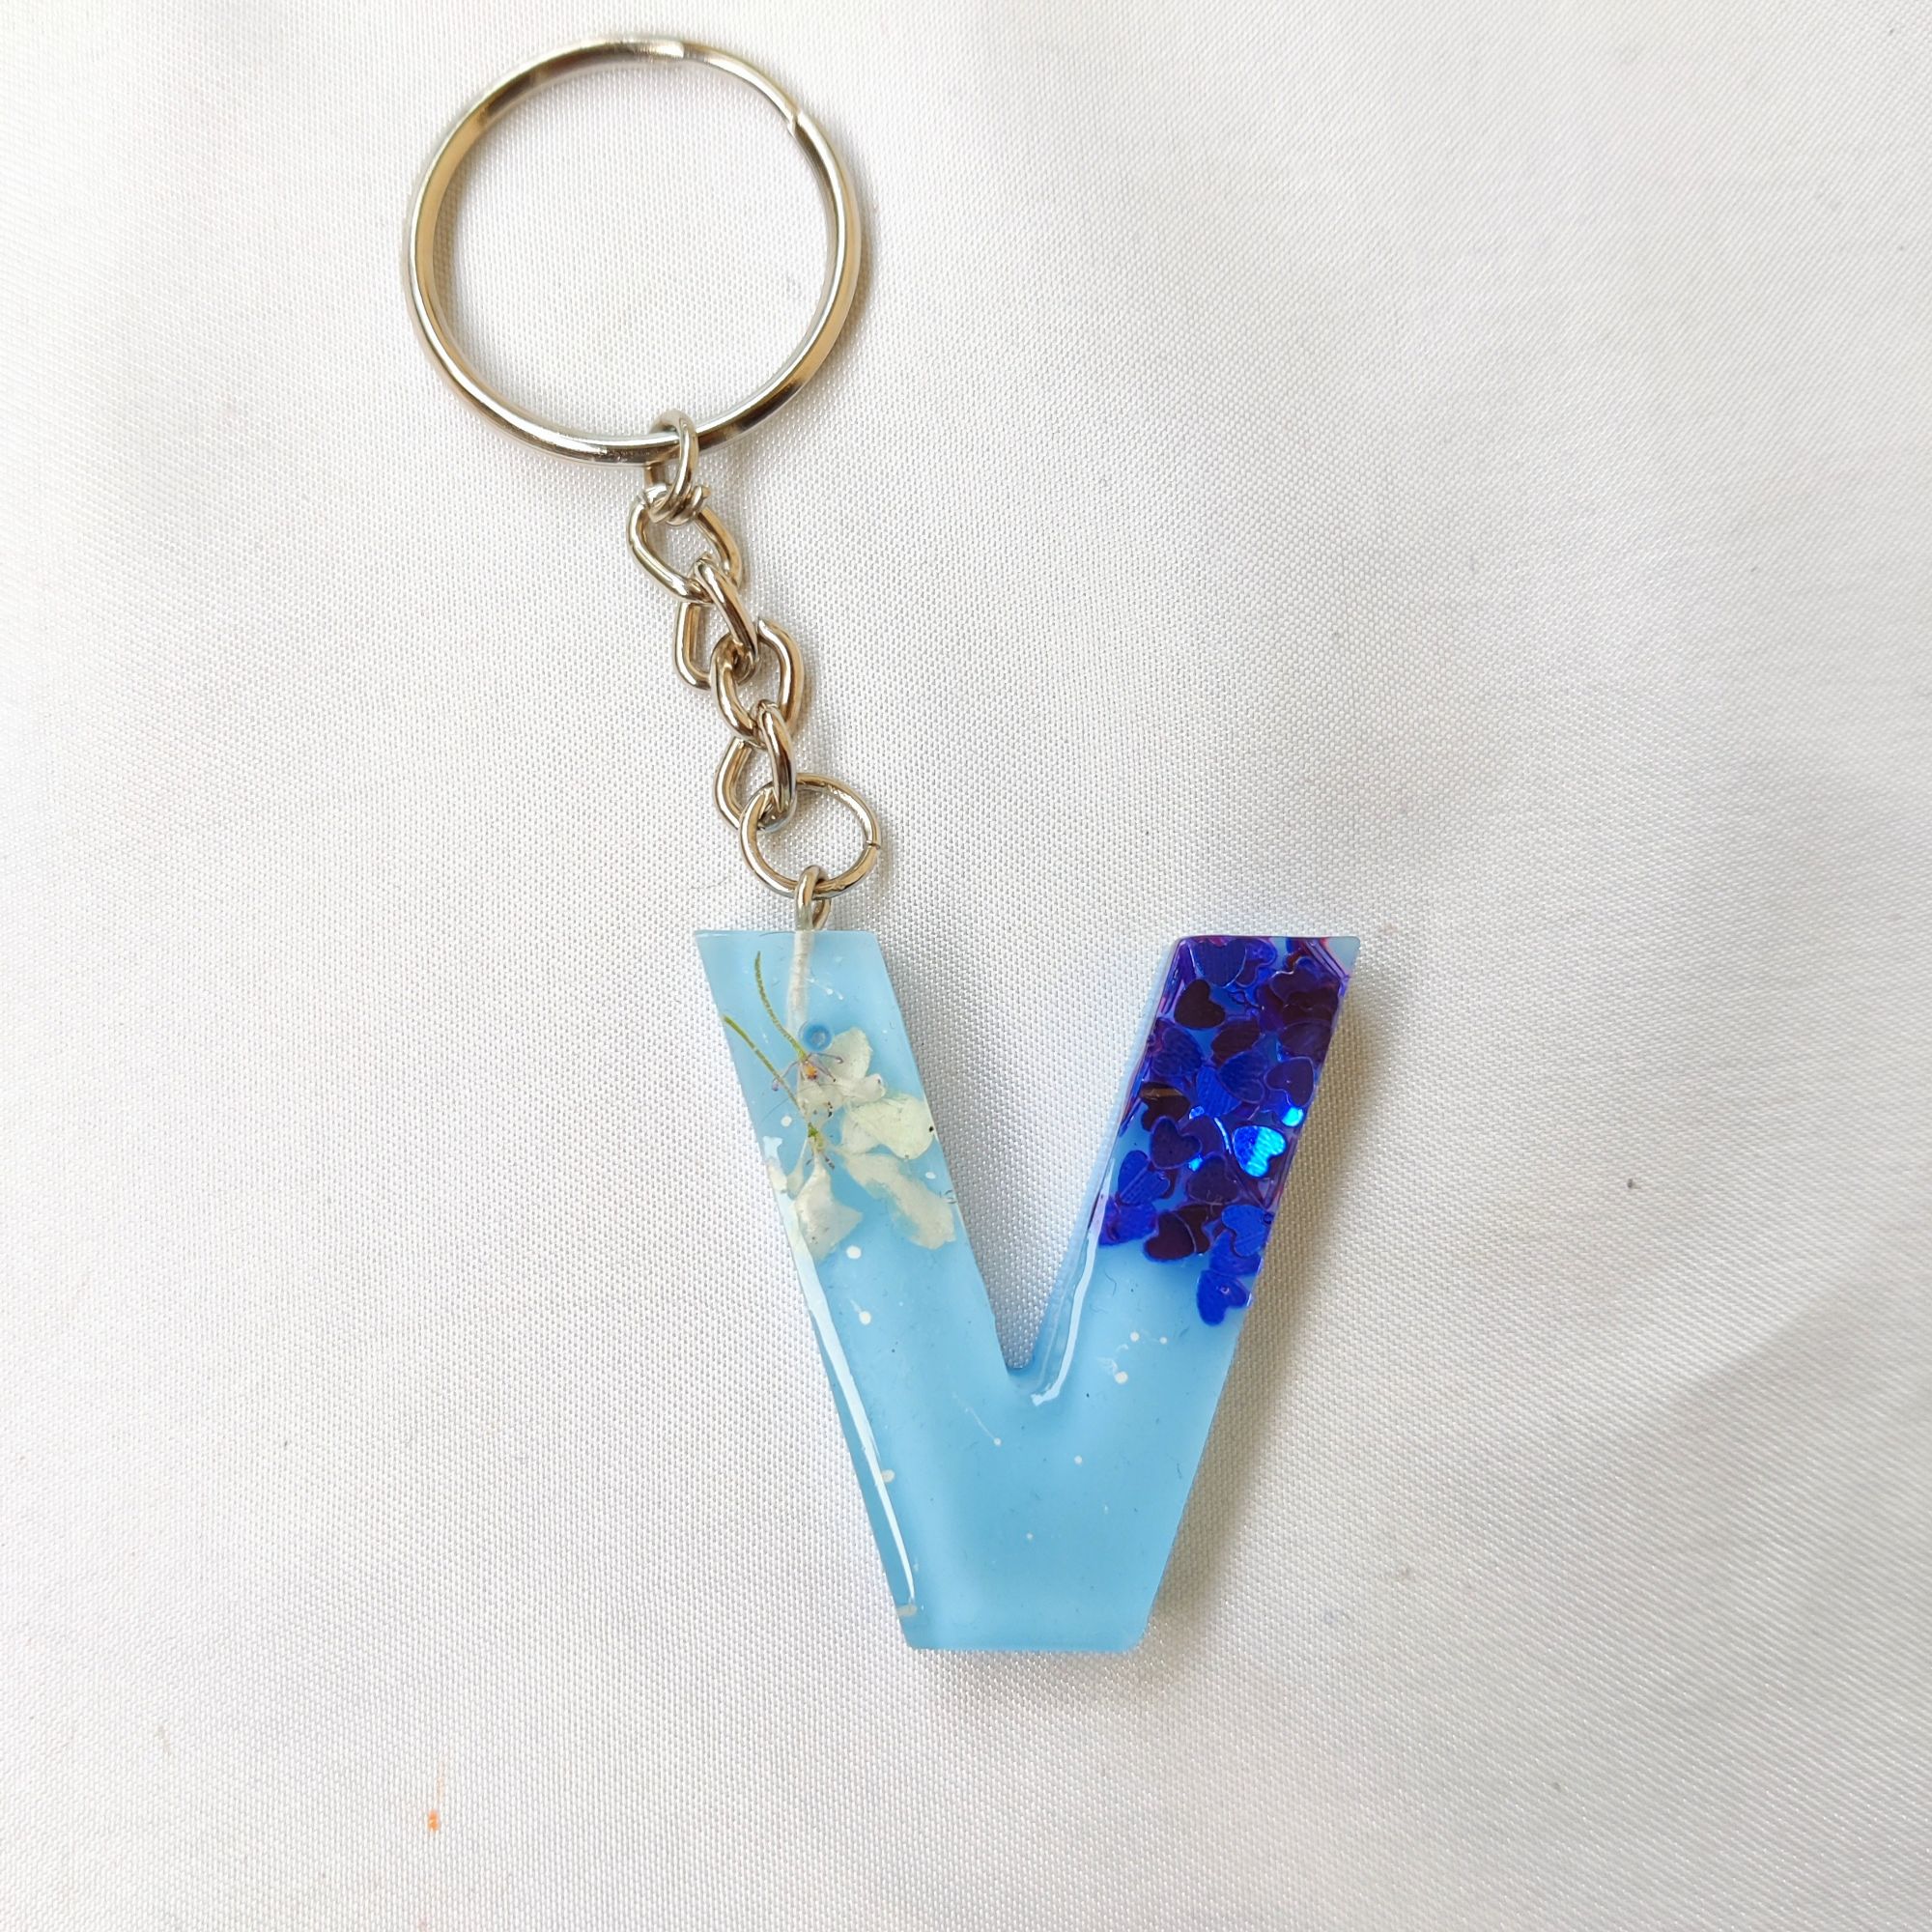 Bliss Keychains